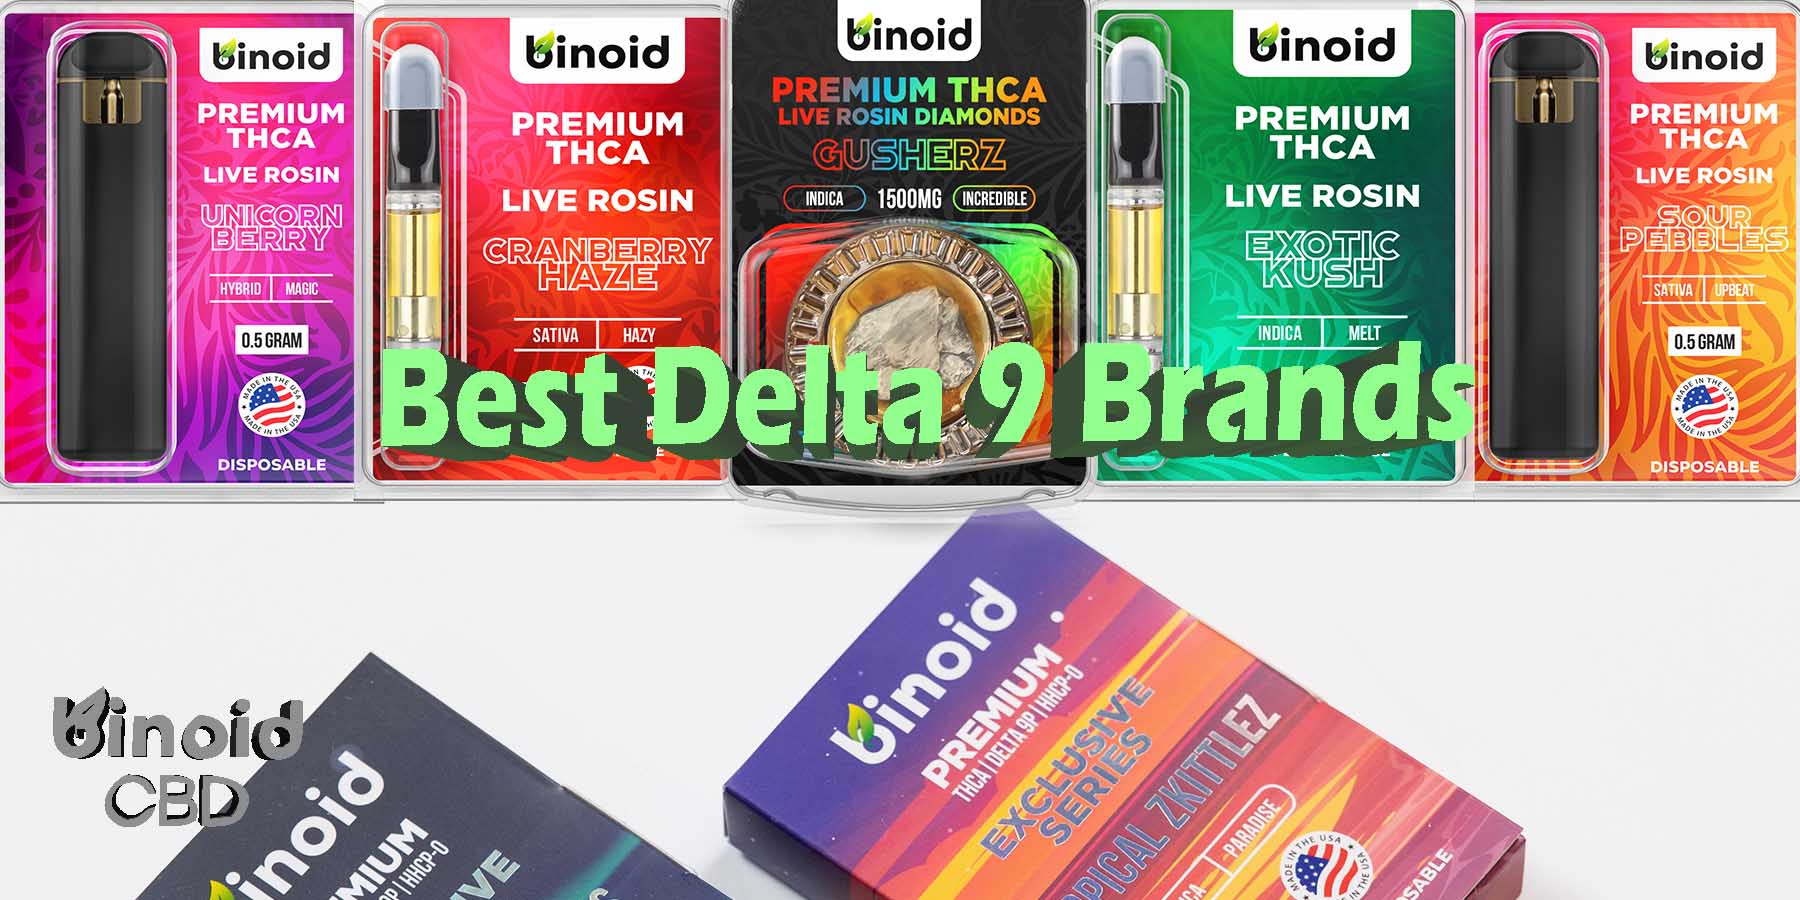 Best Delta 9 Brands Review Gram Review Take-Work Online Best Brand Price Get Near Me Lowest Coupon Discount Store Shop Vapes Carts Online Strongest